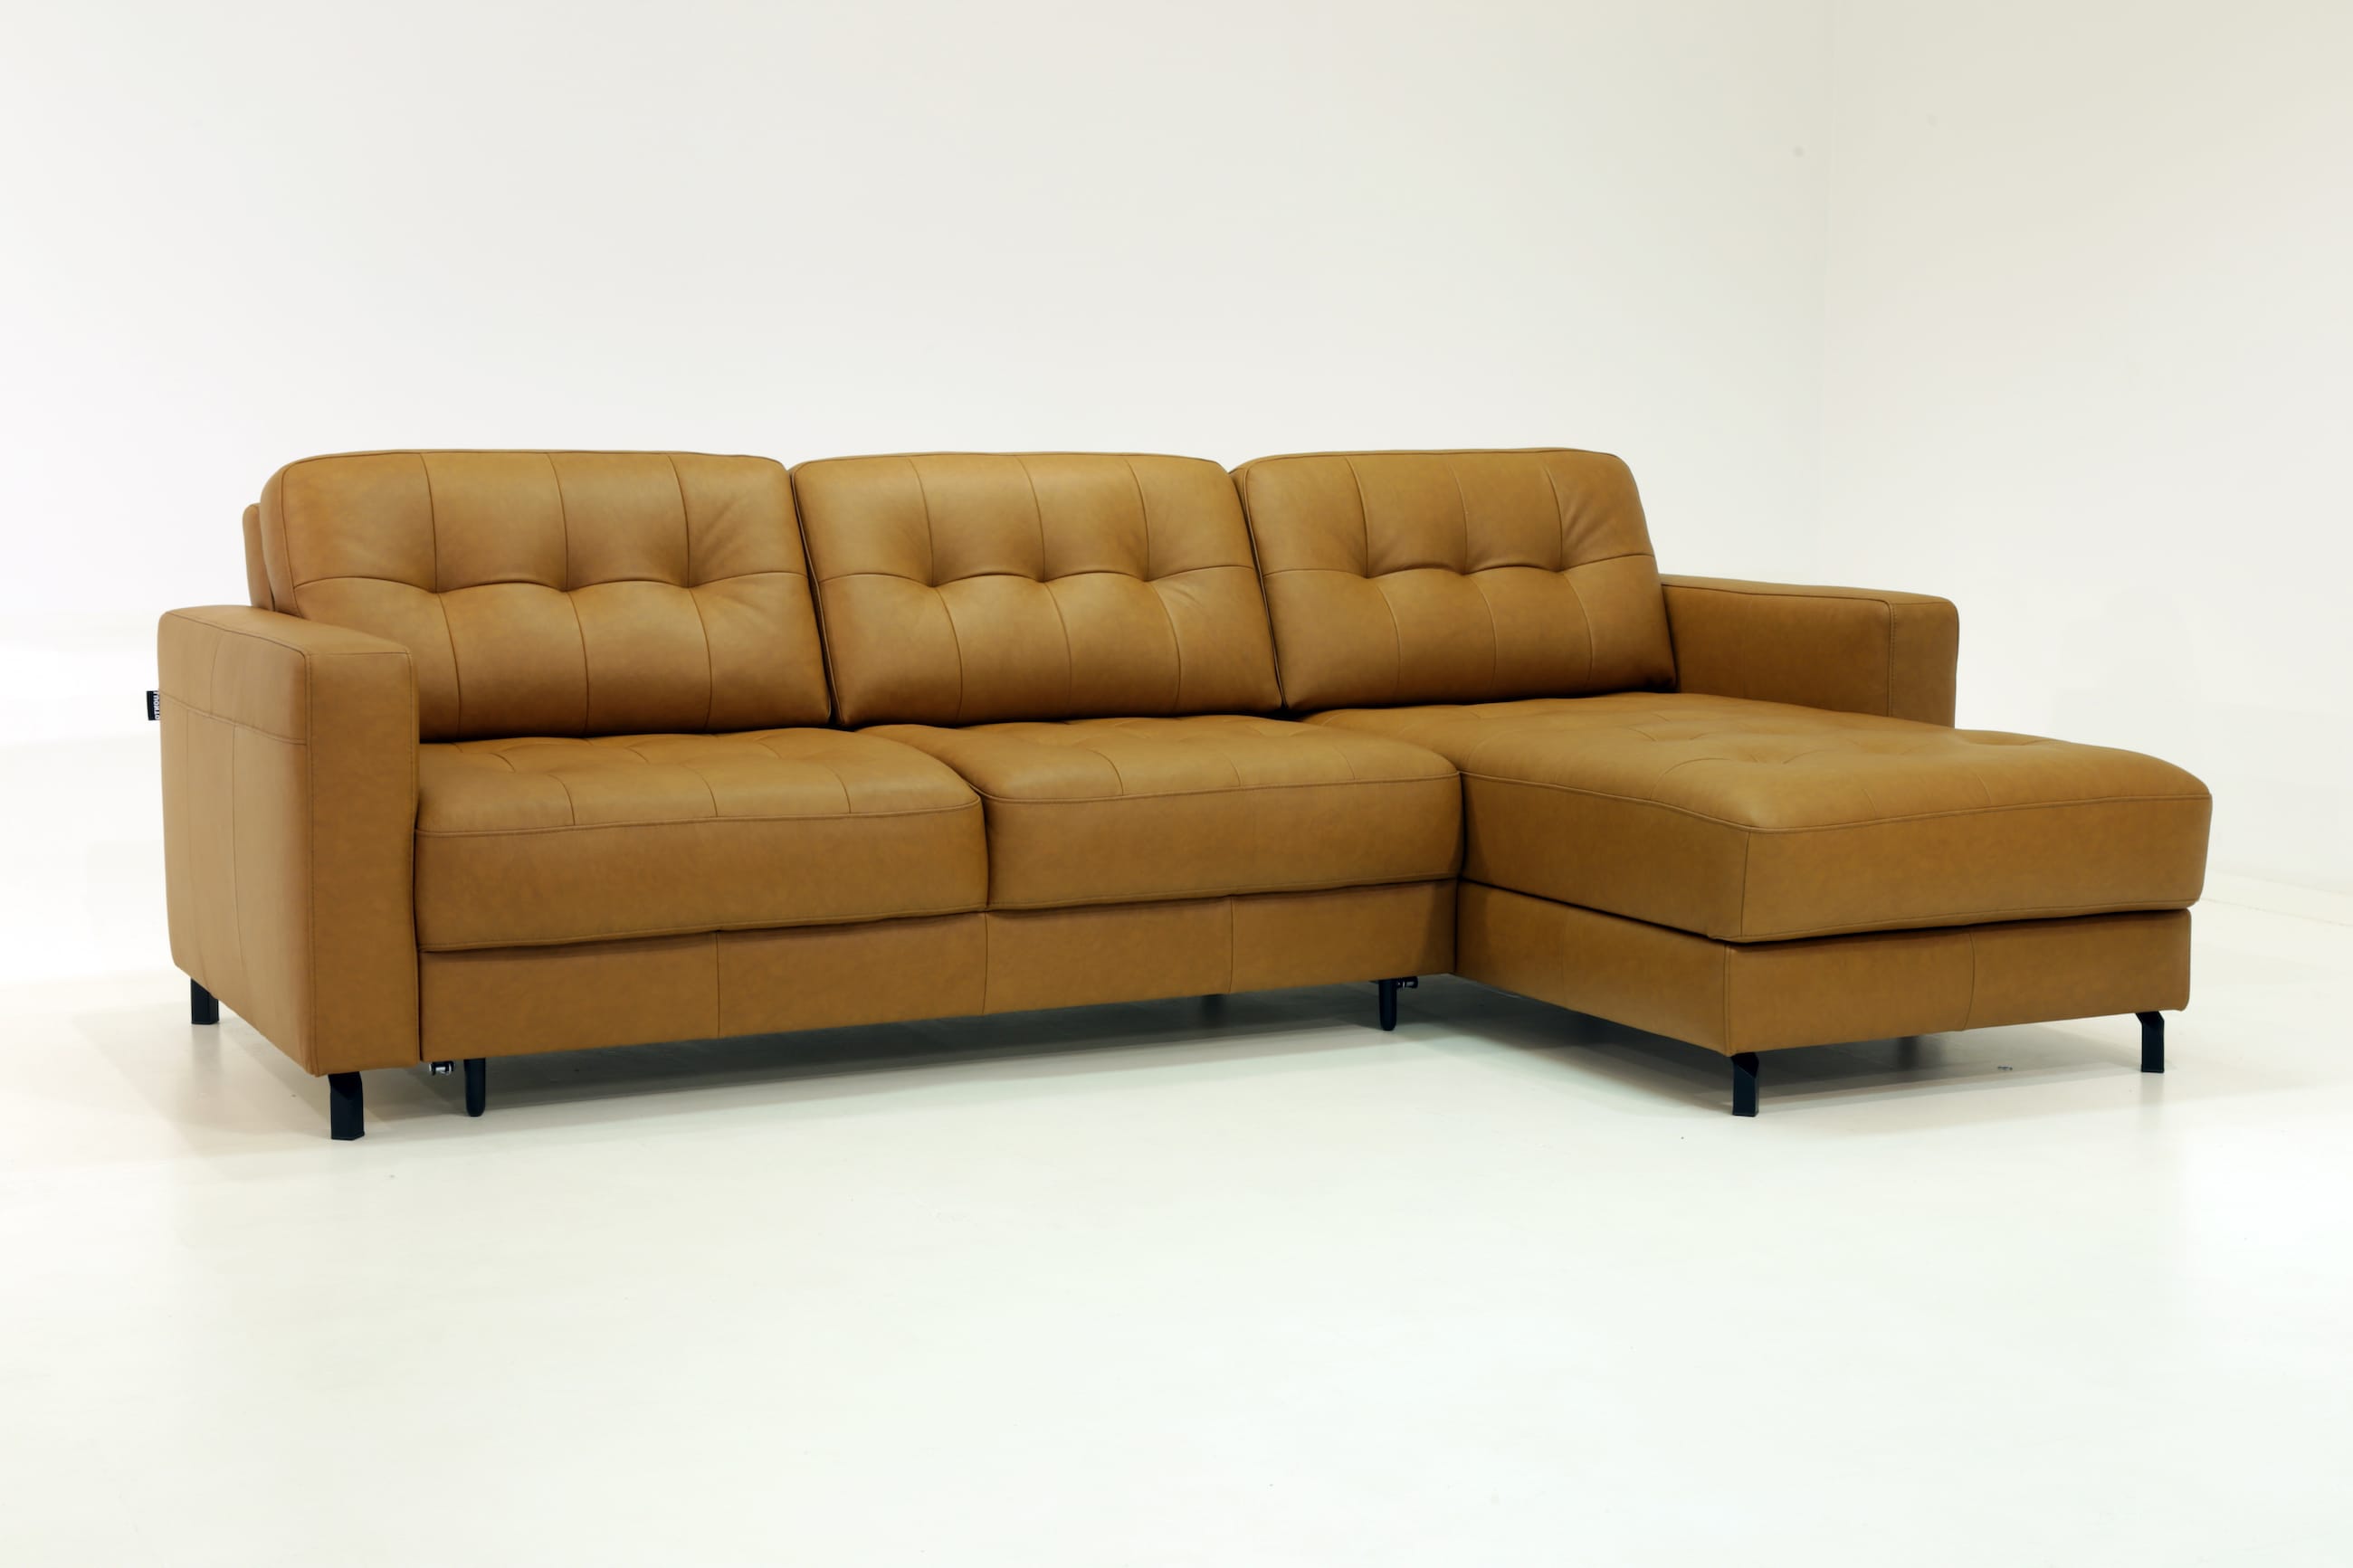 Noah Sectional Sofa Sleeper (Full XL Size) Special Order by Luonto Furniture